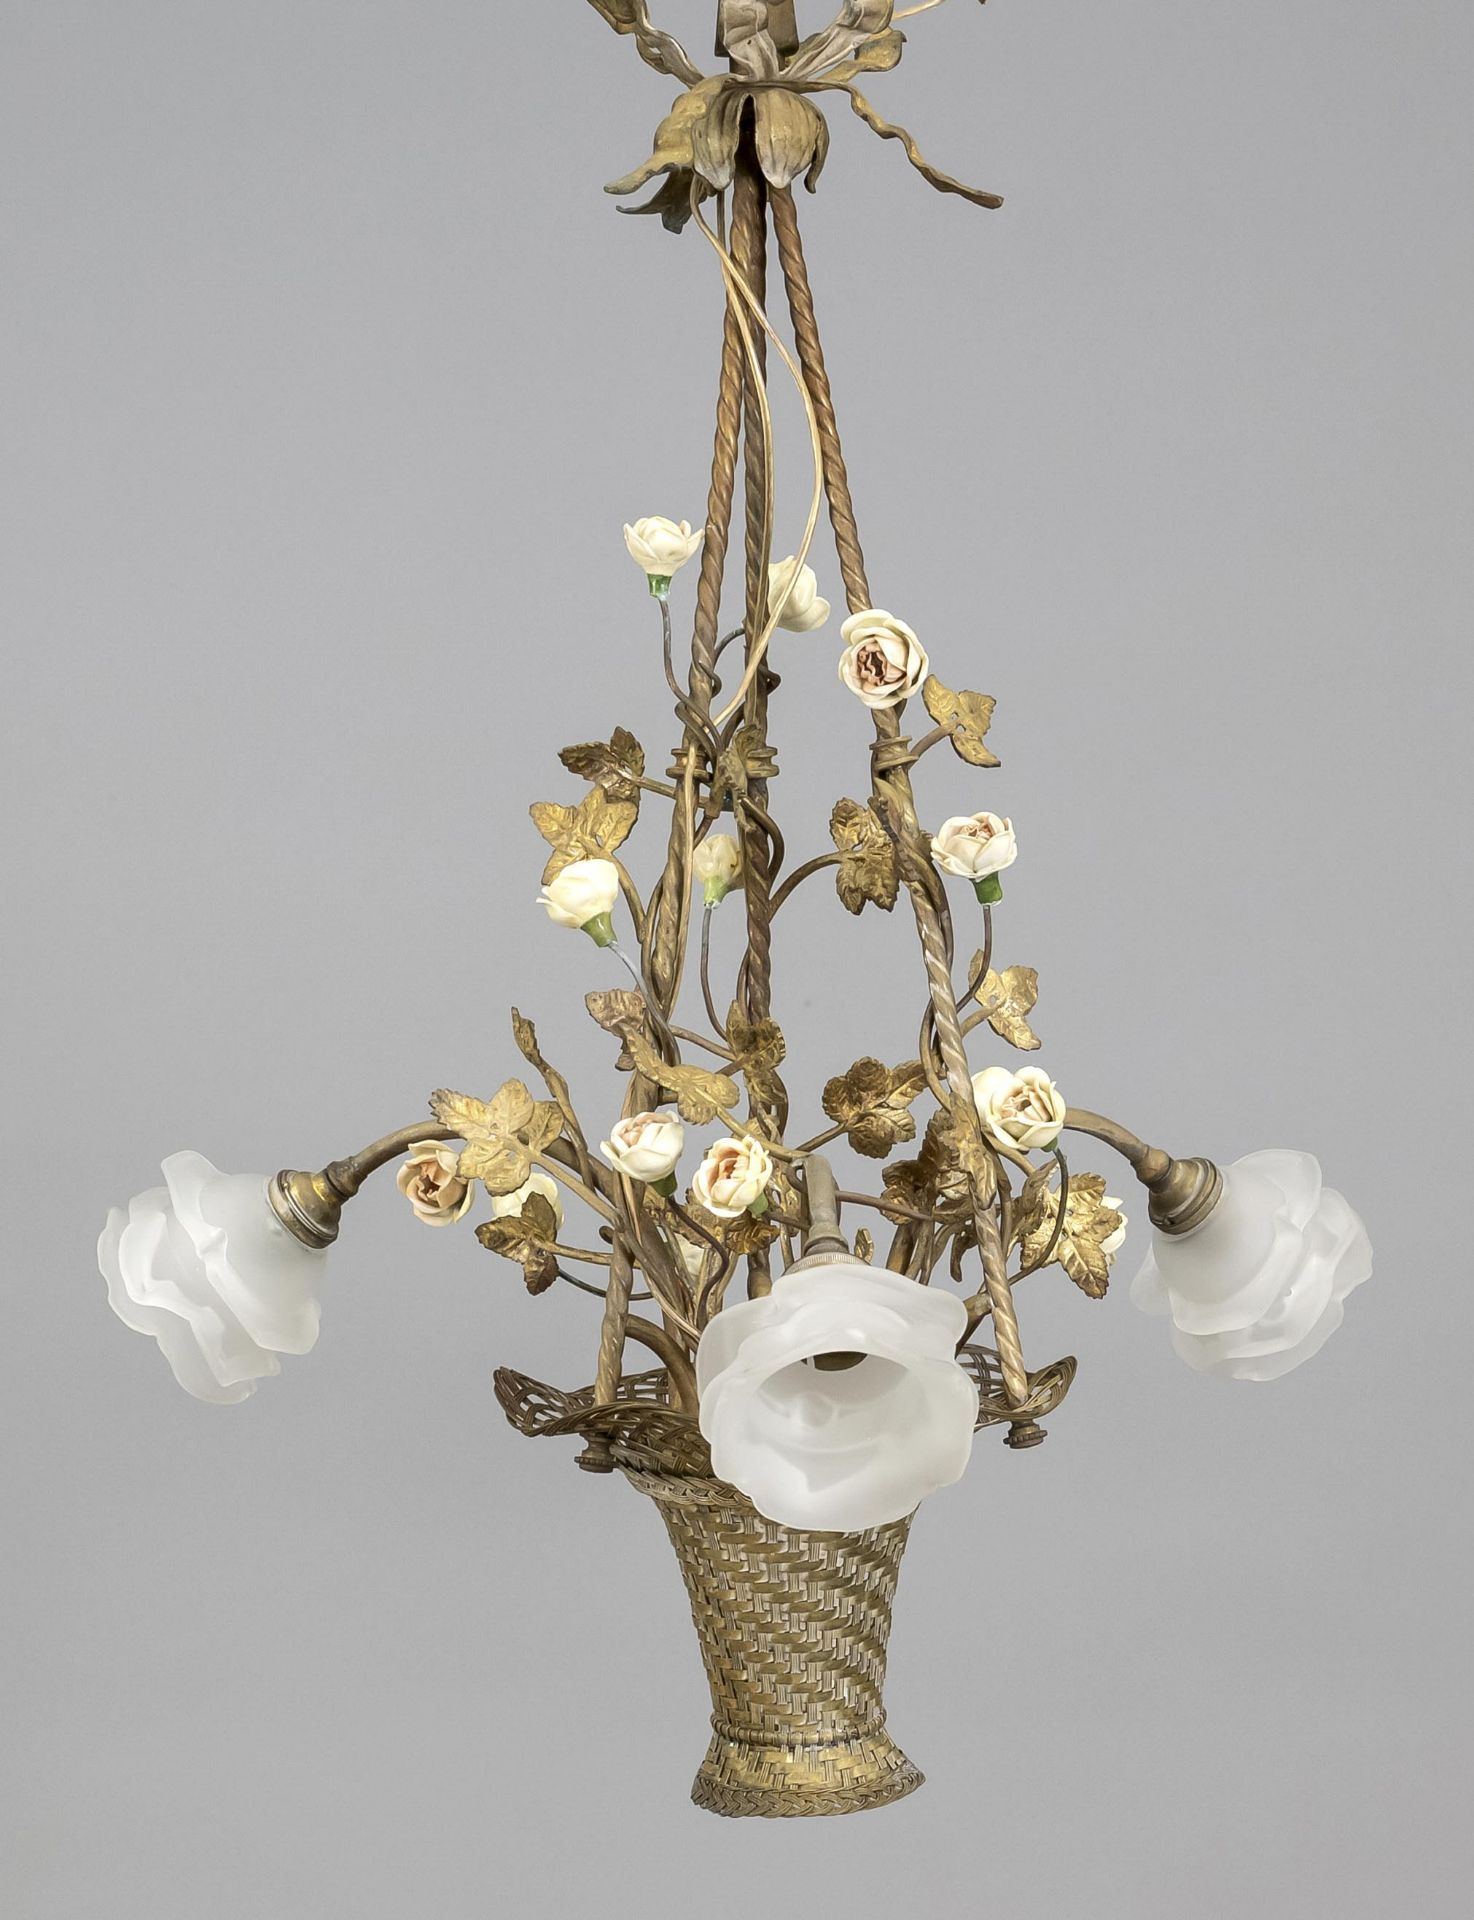 Ceiling lamp, late 19th century, bronze/brass, porcelain. As hanging basket with white roses and 3